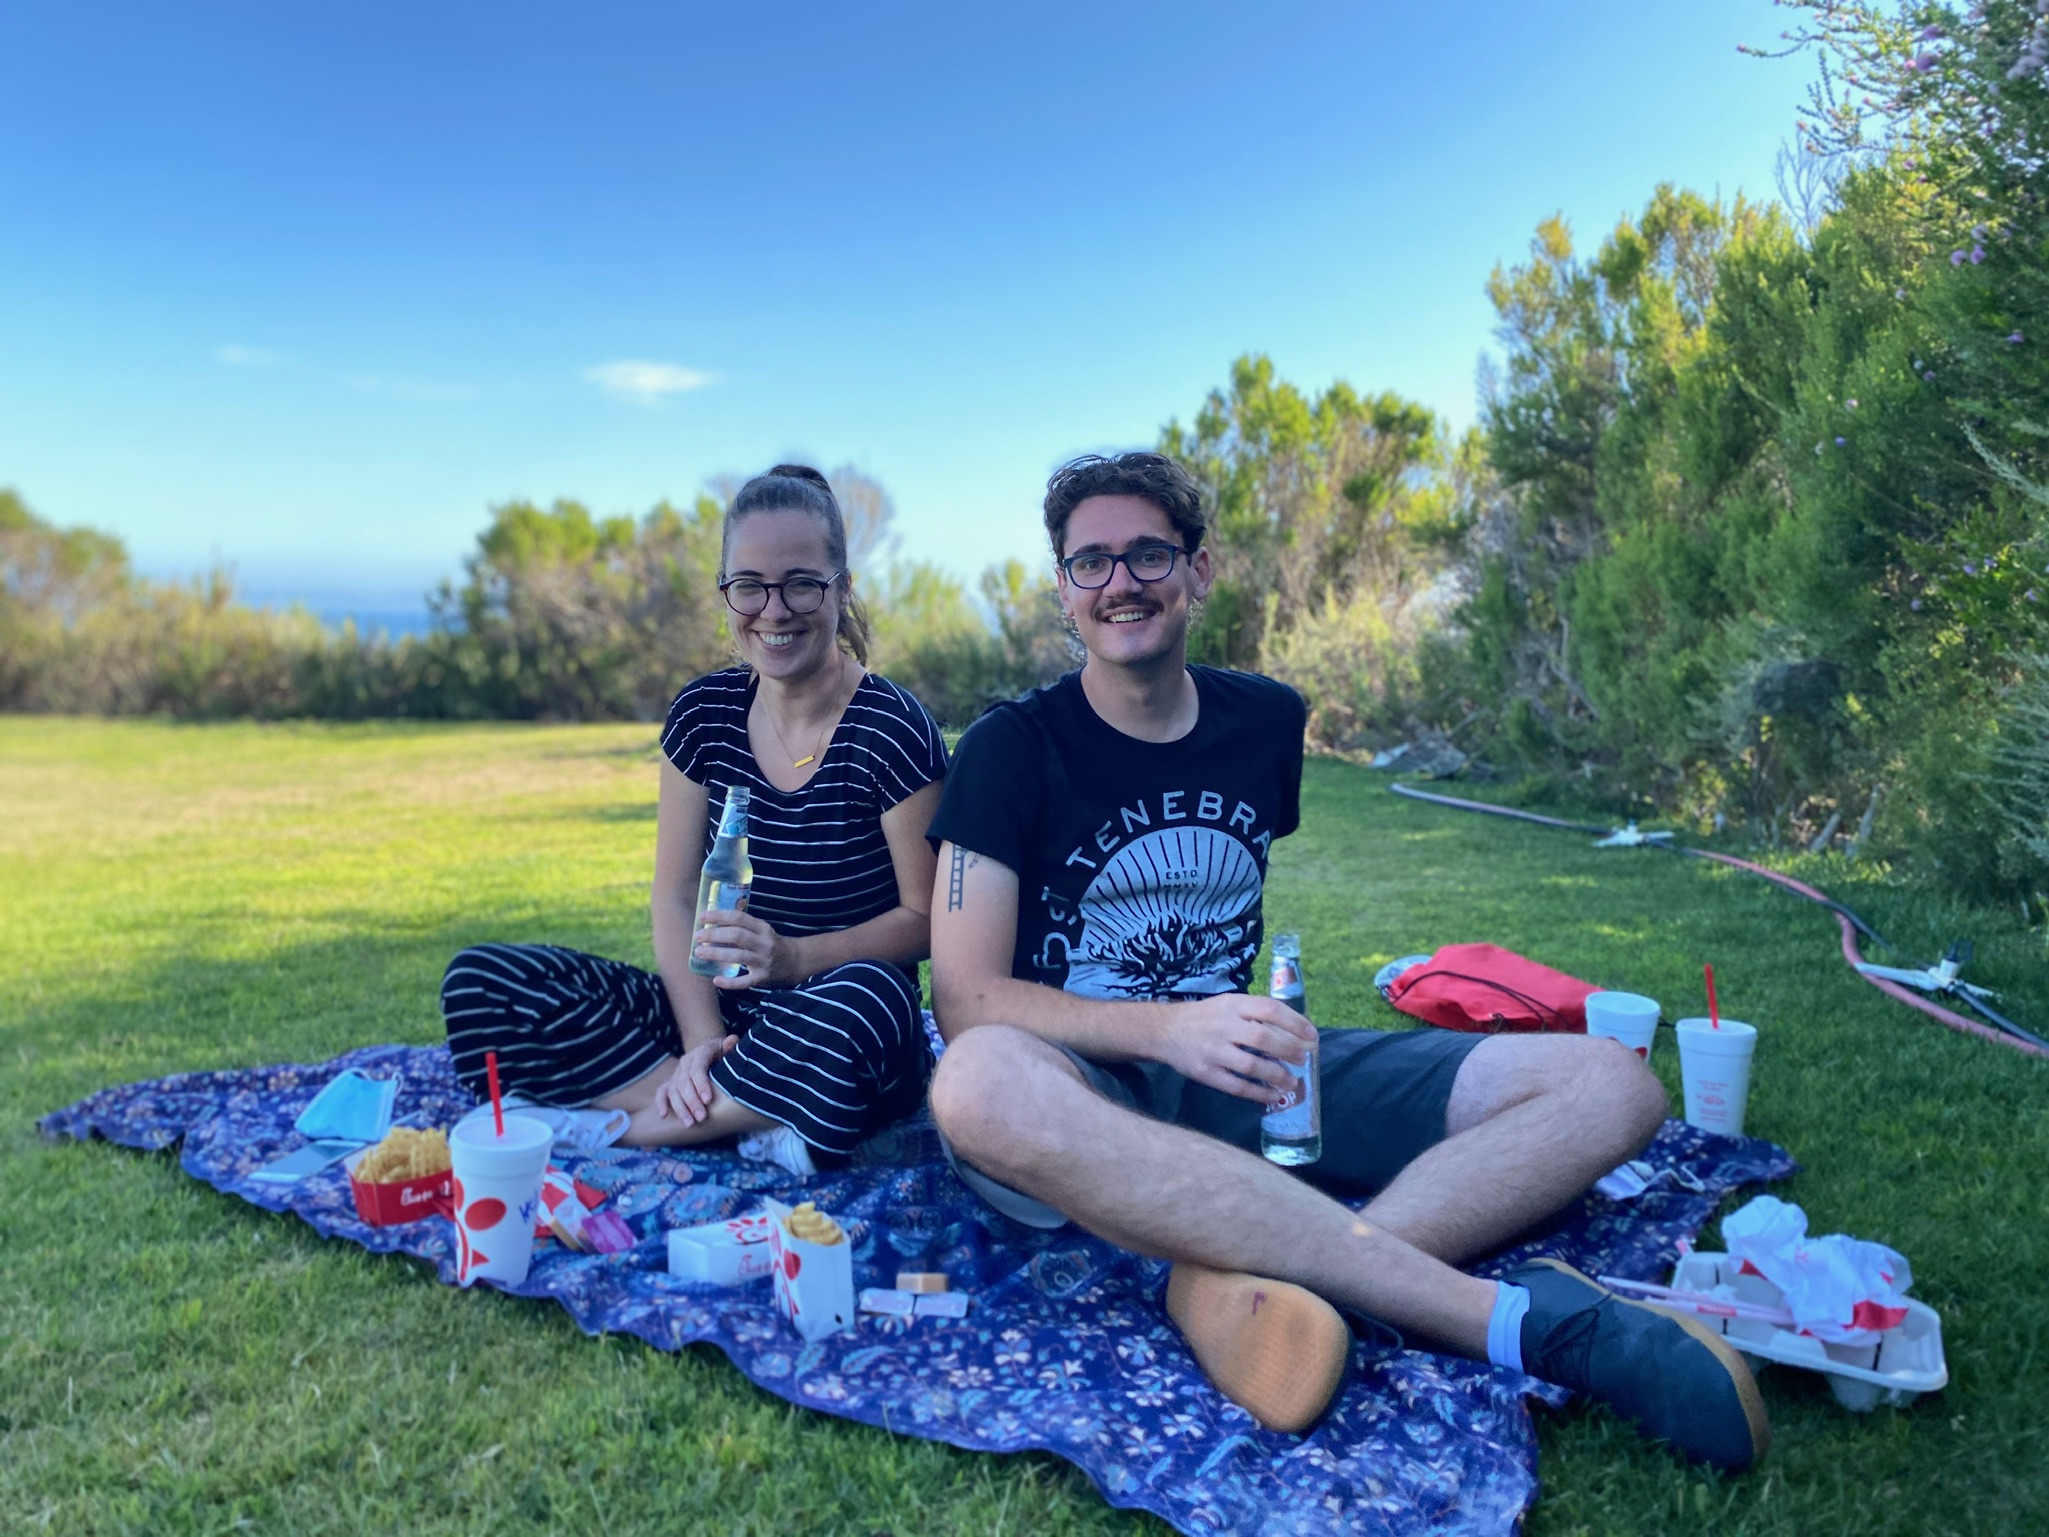 Annaliese and Jared at an outside picnic